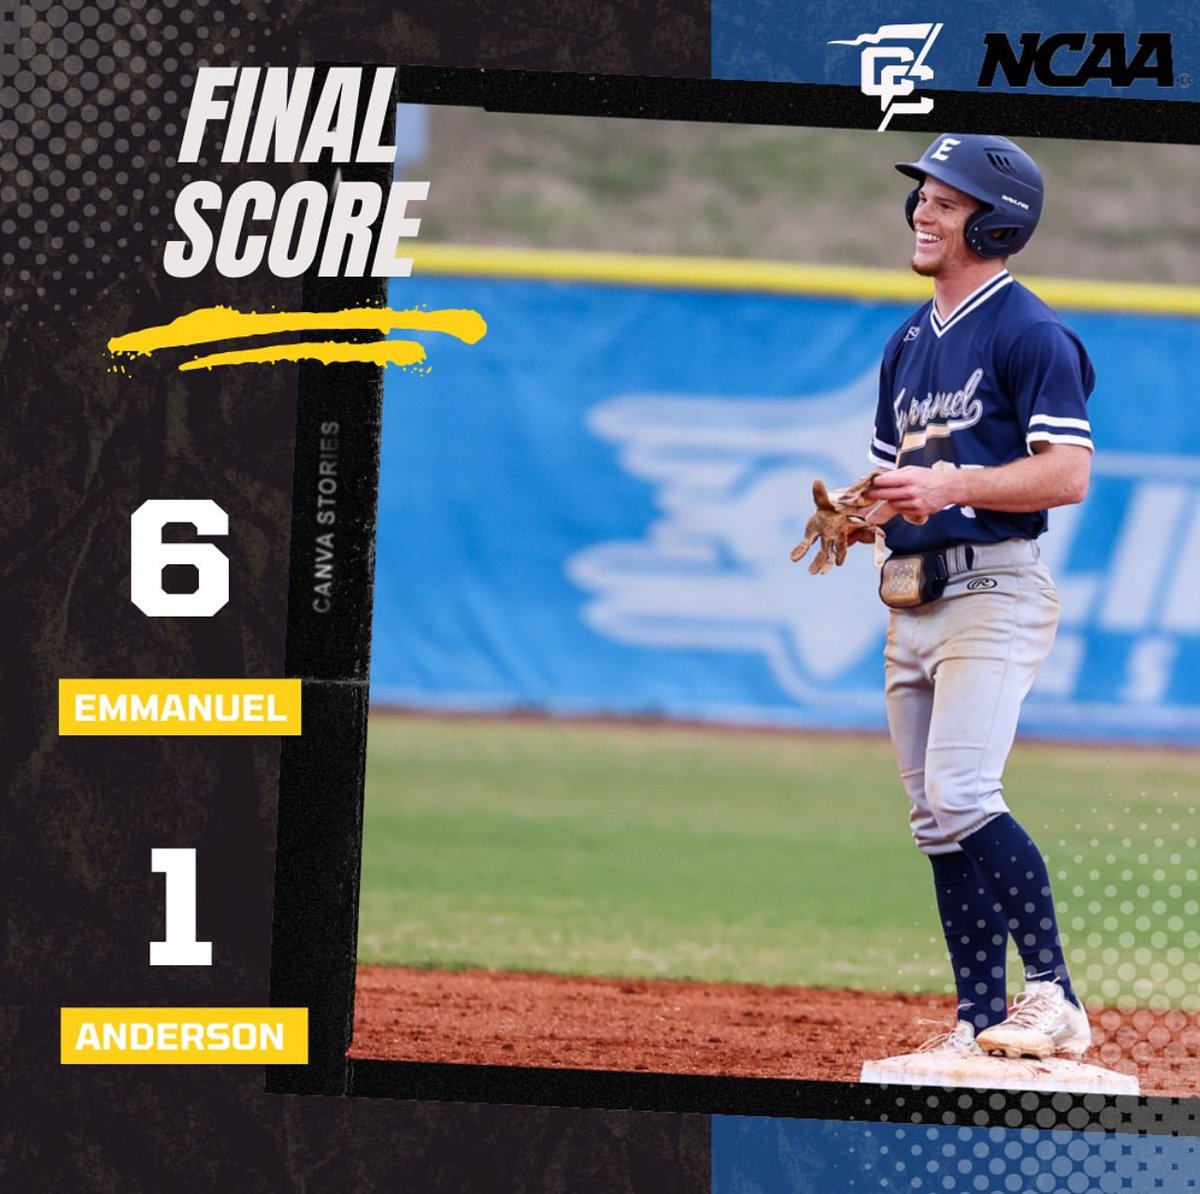 The Lions steal a win behind a masterful performance by Veteran RHP @ColbyFields11 on 9 Ks allowing only 3 hits 👀‼️ FR @lucas_meehan and @huntermaddox413 come in to close it out 😎🔥 #GoLions #EmmanuelBaseball